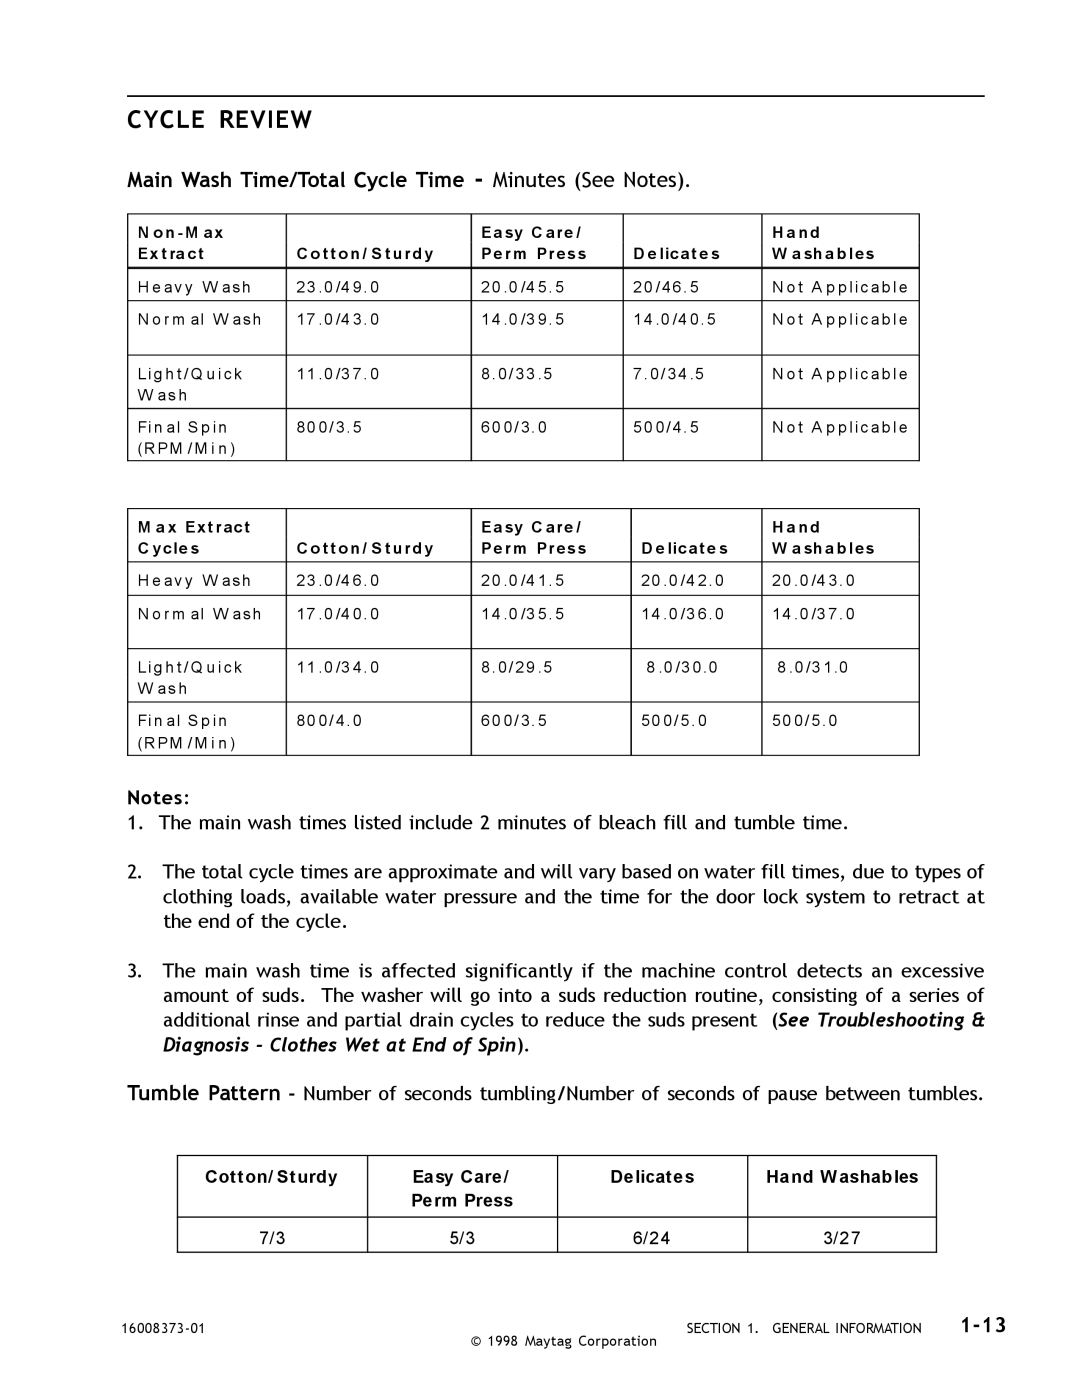 Whirlpool MAH3000 service manual Cycle Review, Main Wash Time/Total Cycle Time - Minutes See Notes, 1-13 